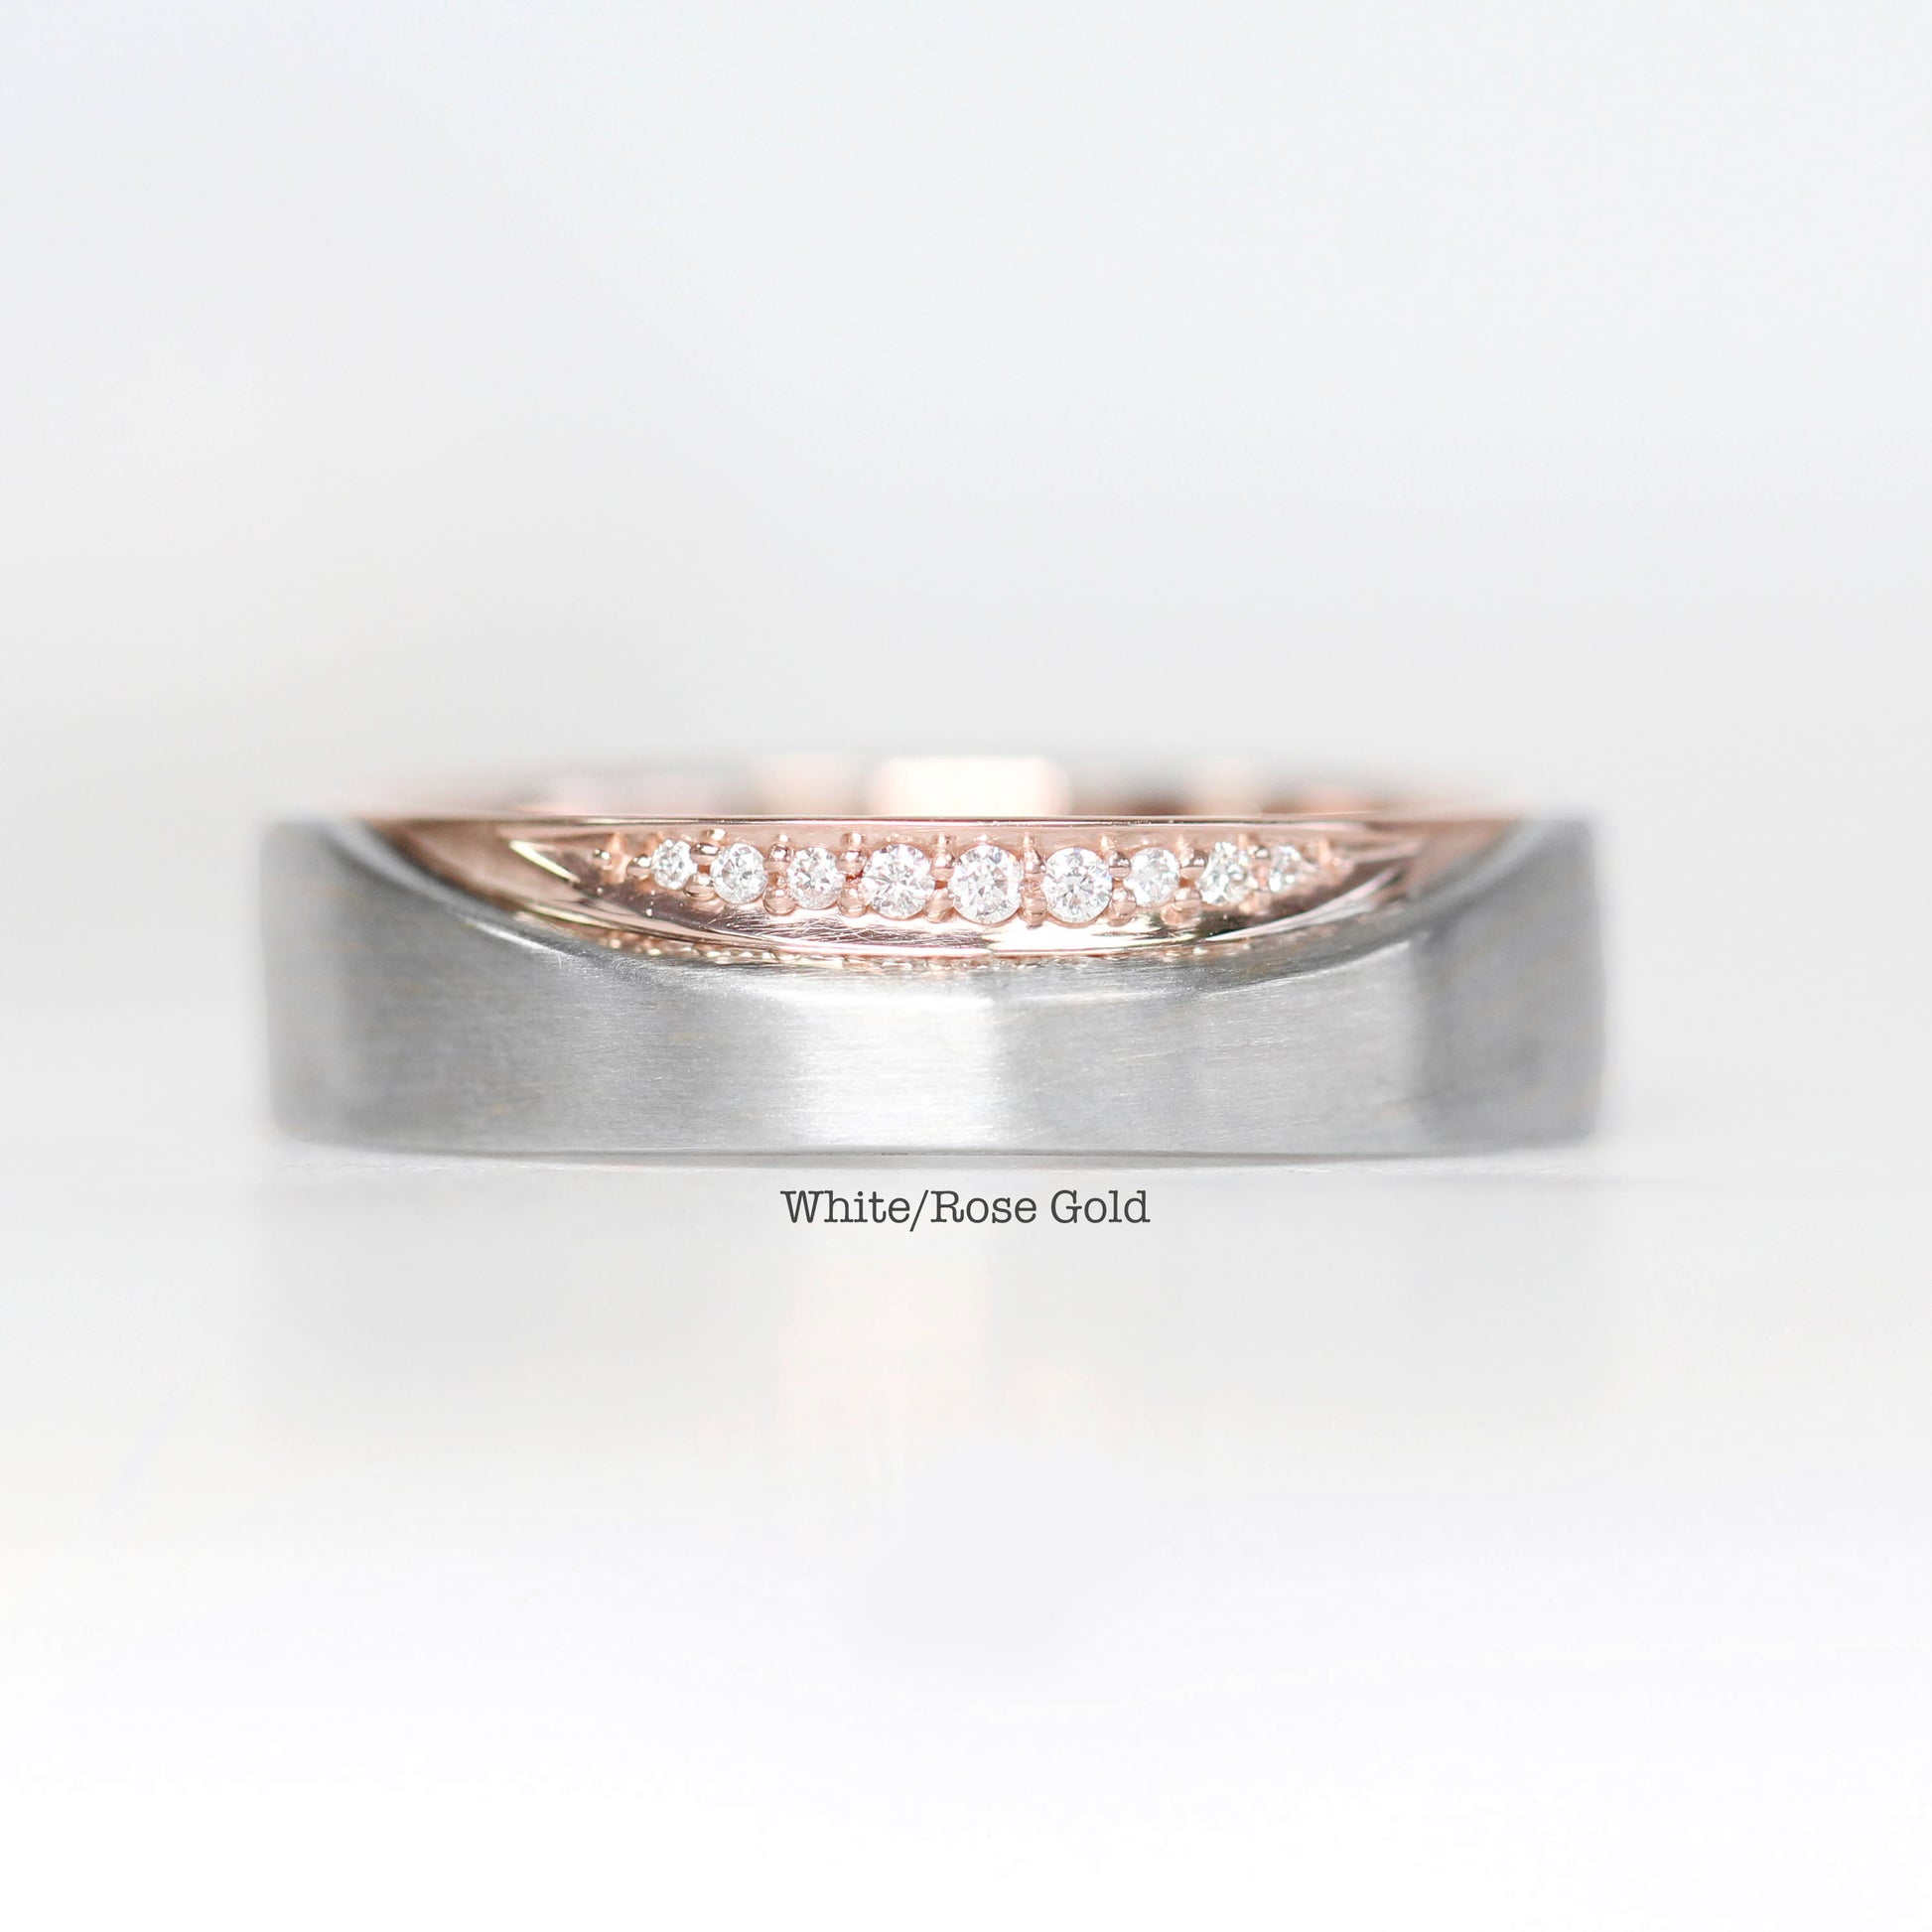 Caleb ring - Two or one tone - Diamond unisex wedding band -  Made to Order - Midwinter Co. Alternative Bridal Rings and Modern Fine Jewelry